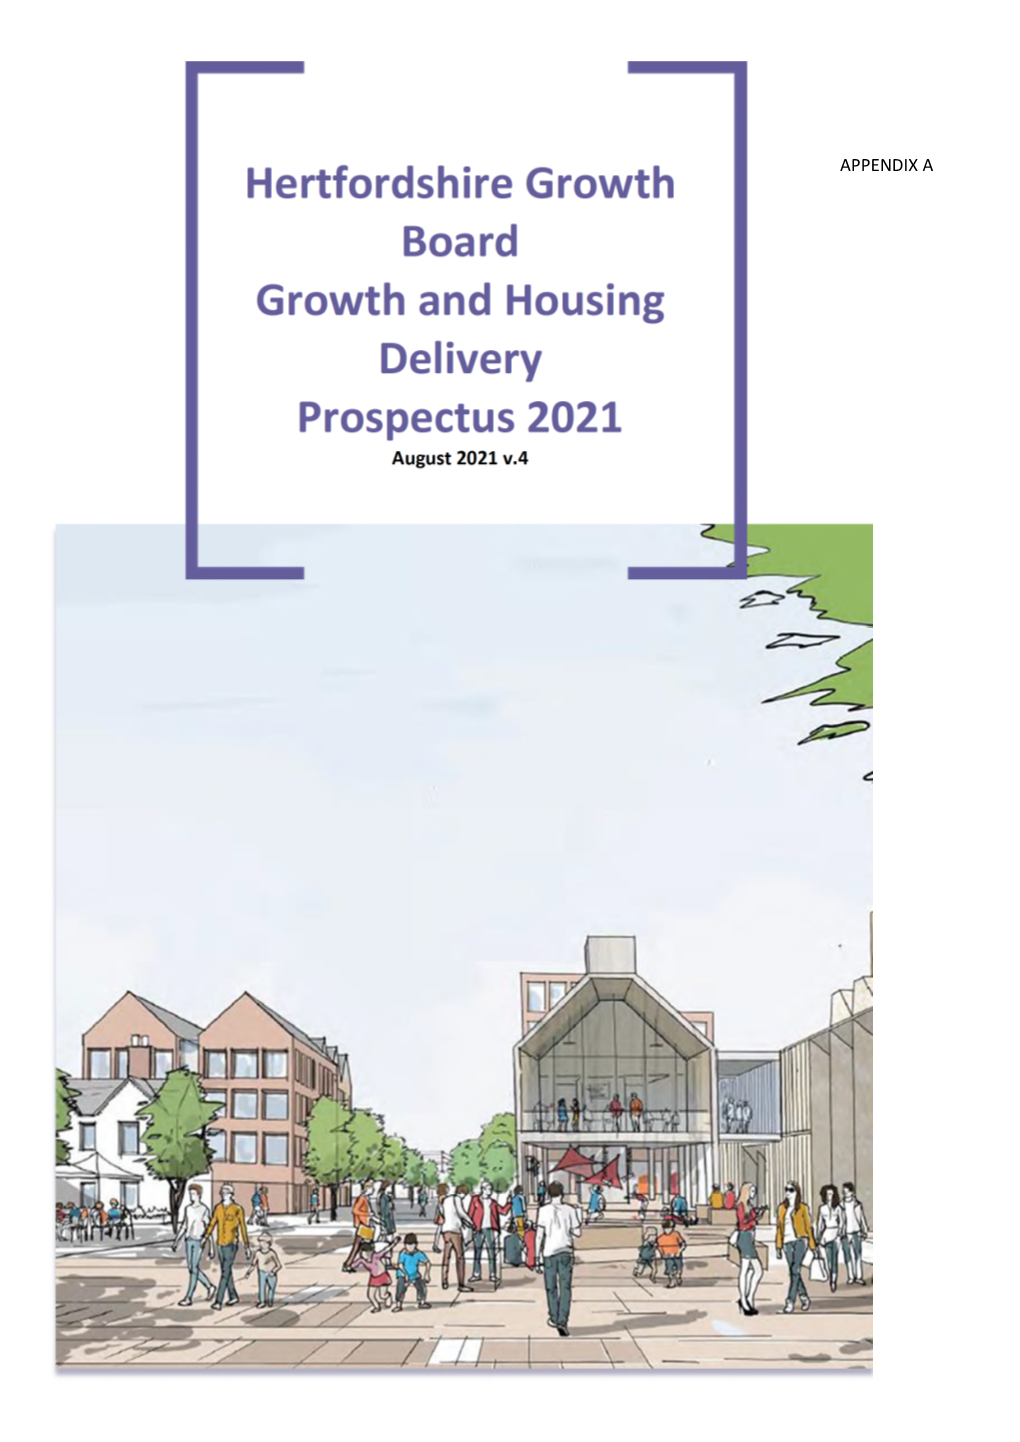 Hertfordshire Growth Board Growth and Housing Delivery Prospectus